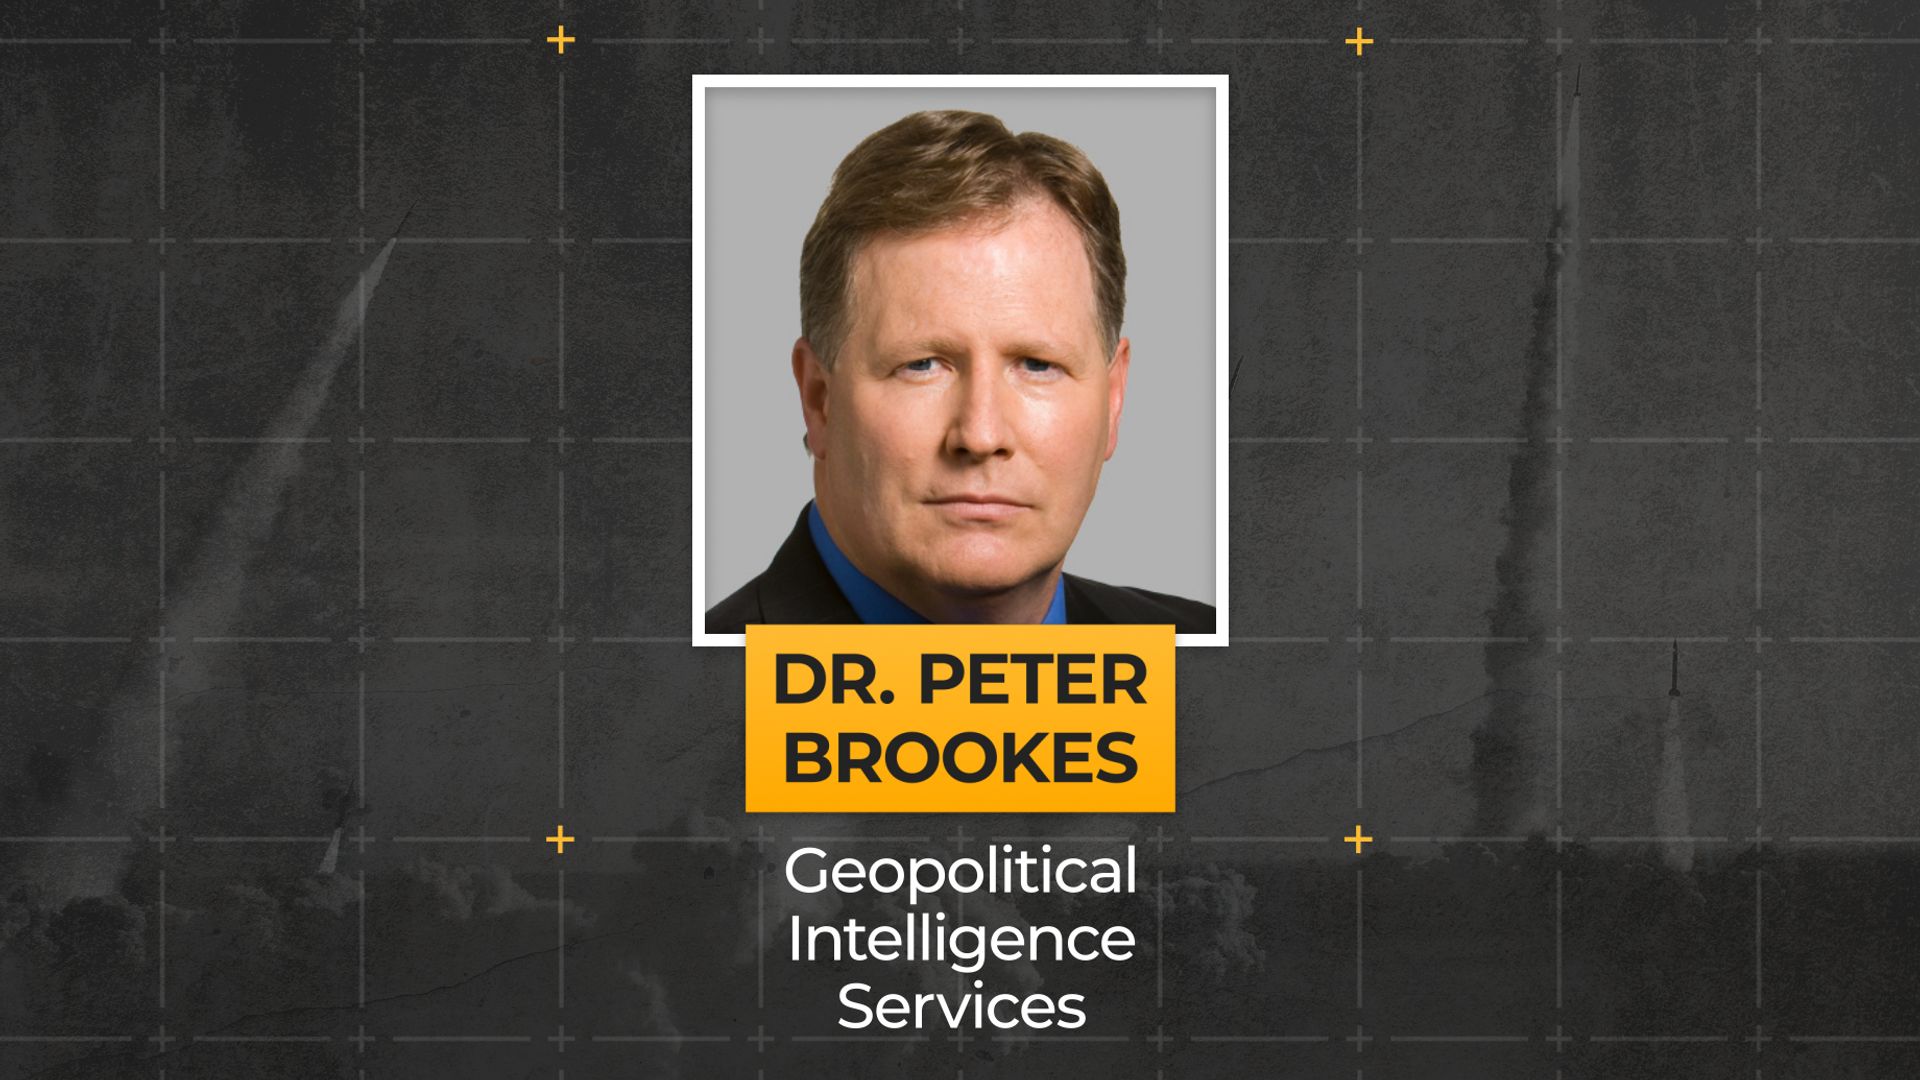 This week's Weapons and Warfare brings an exclusive conversation with Dr. Peter Brooks on Iran's nuclear program.